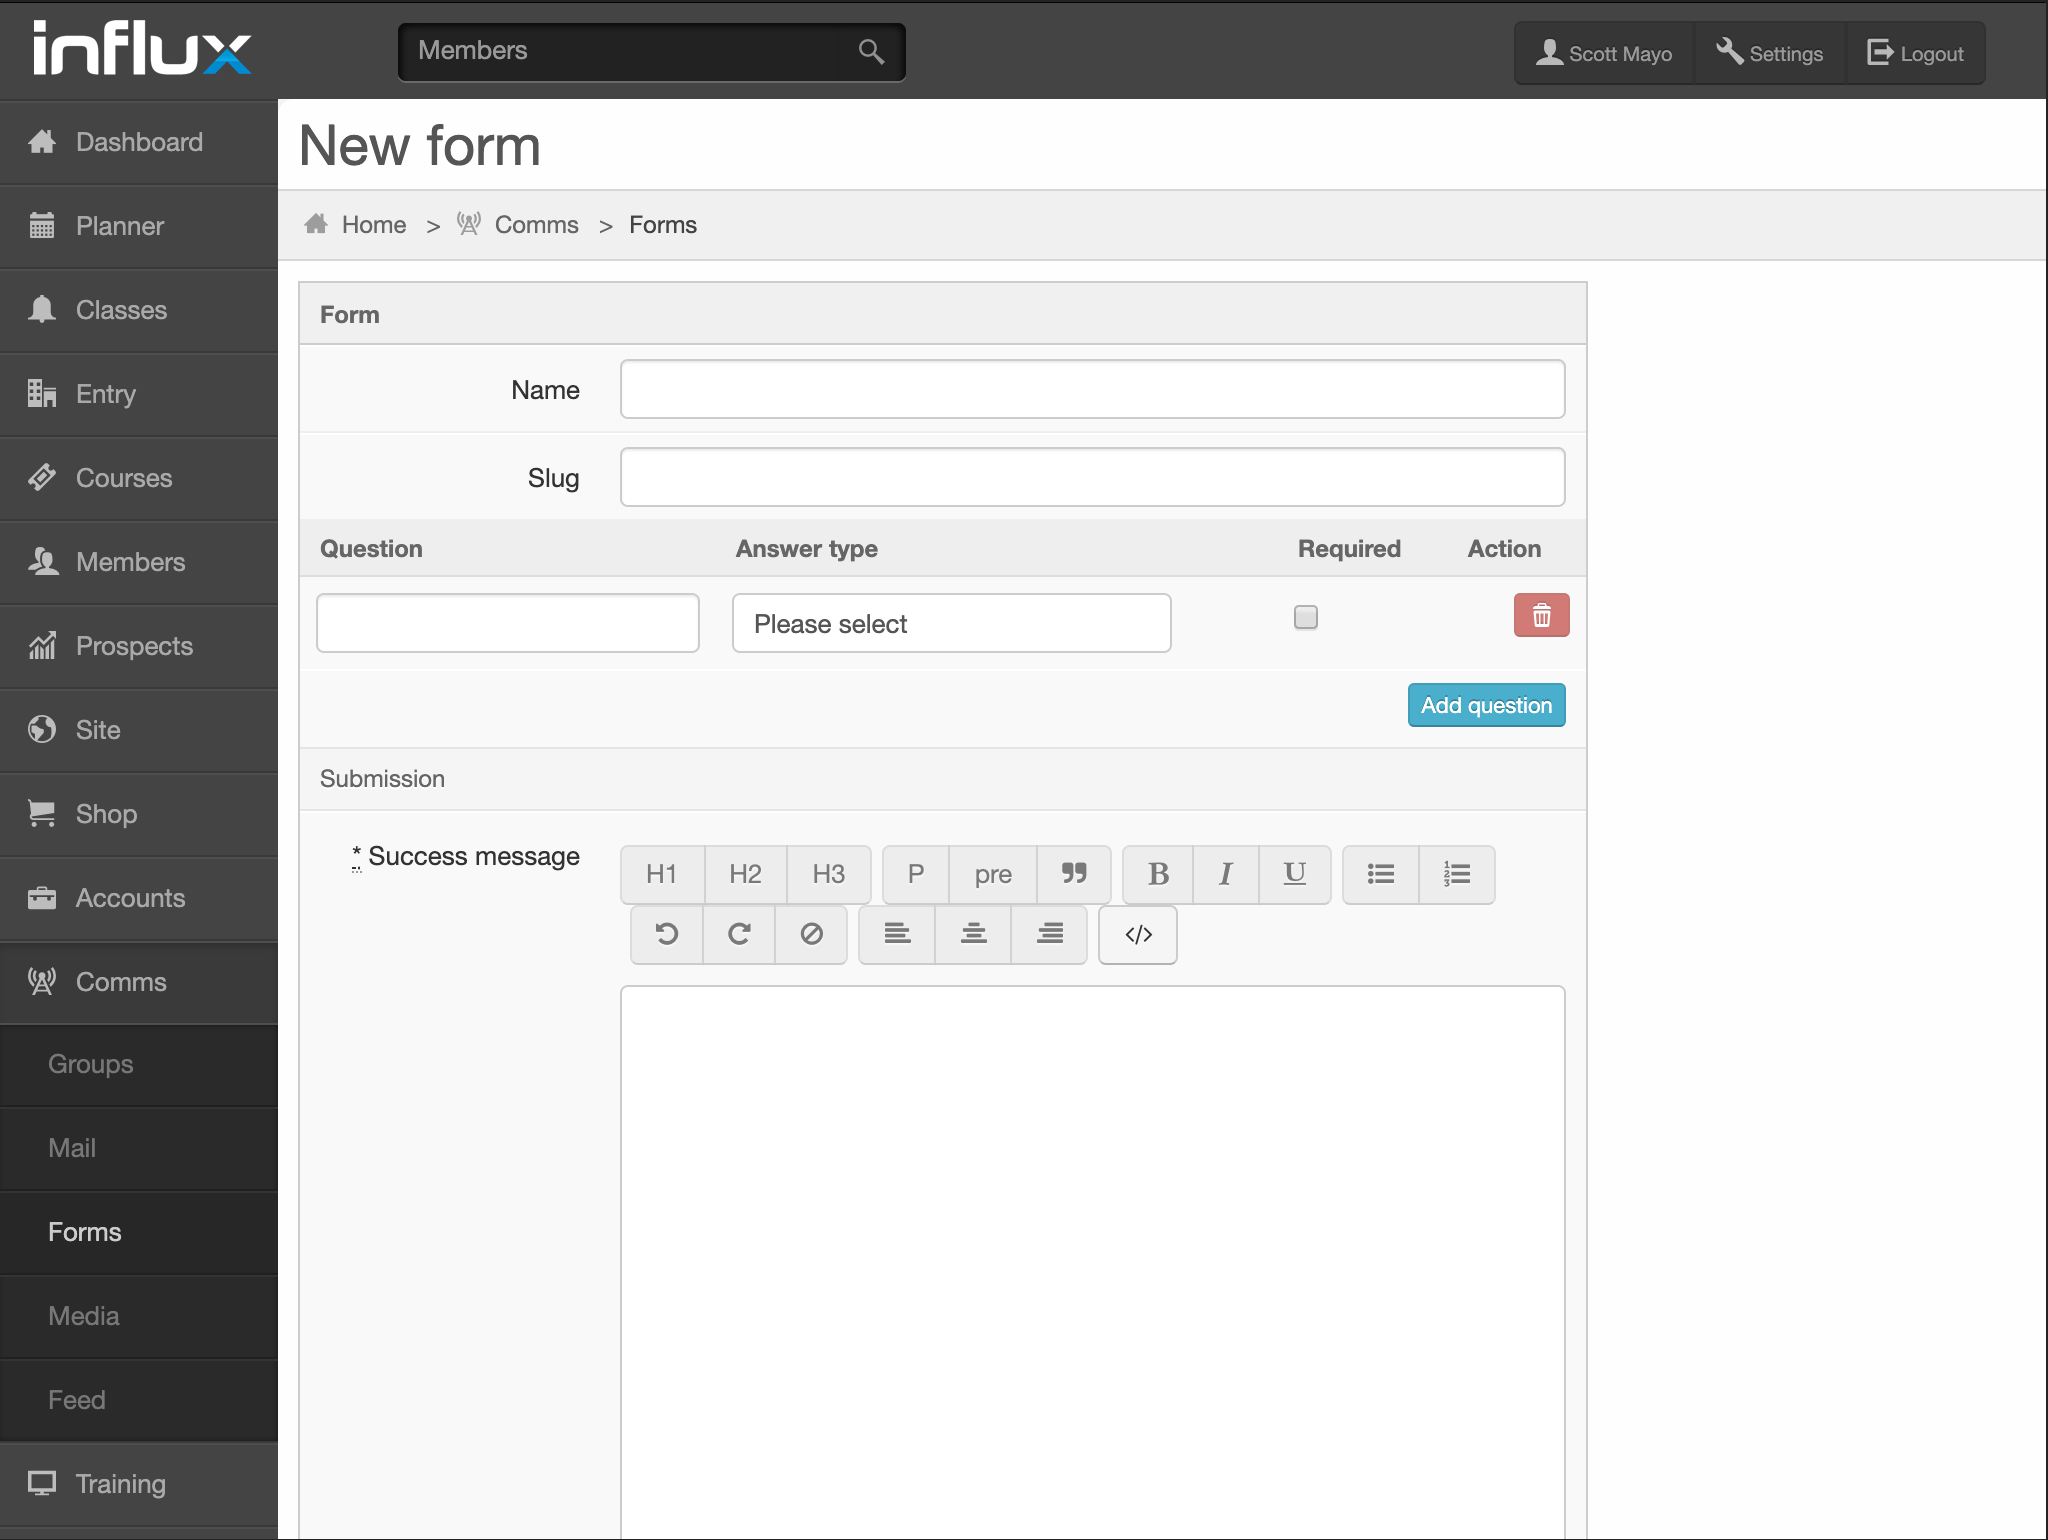 Creating a new custom form in Influx